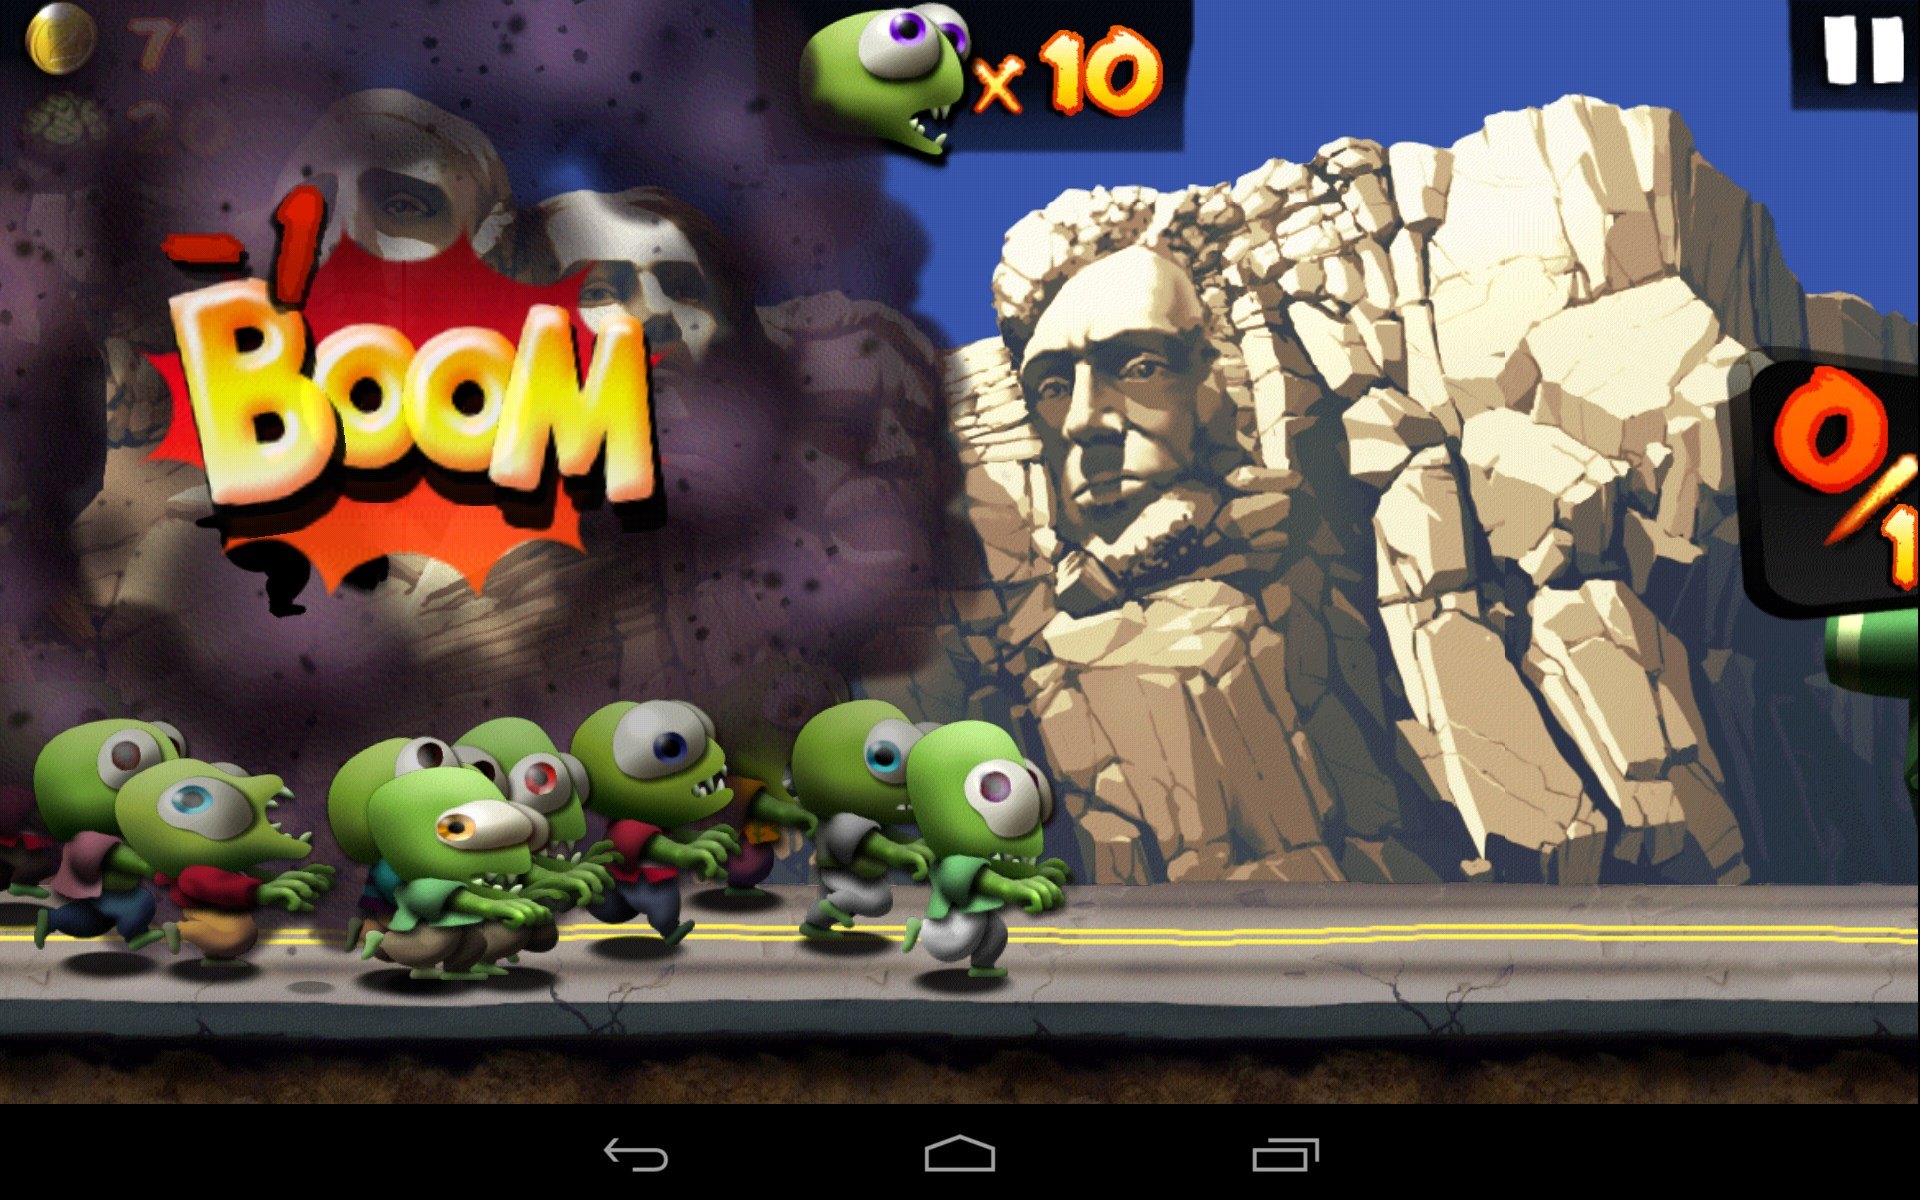 How to download Zombie Tsunami on Mobile